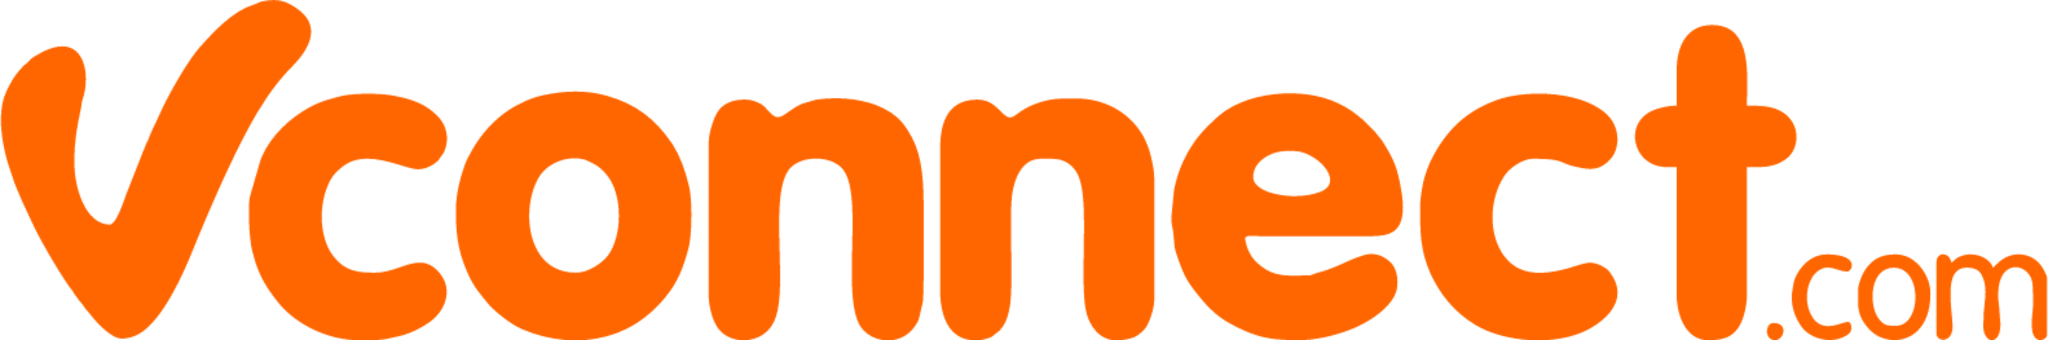 Vconnect icon